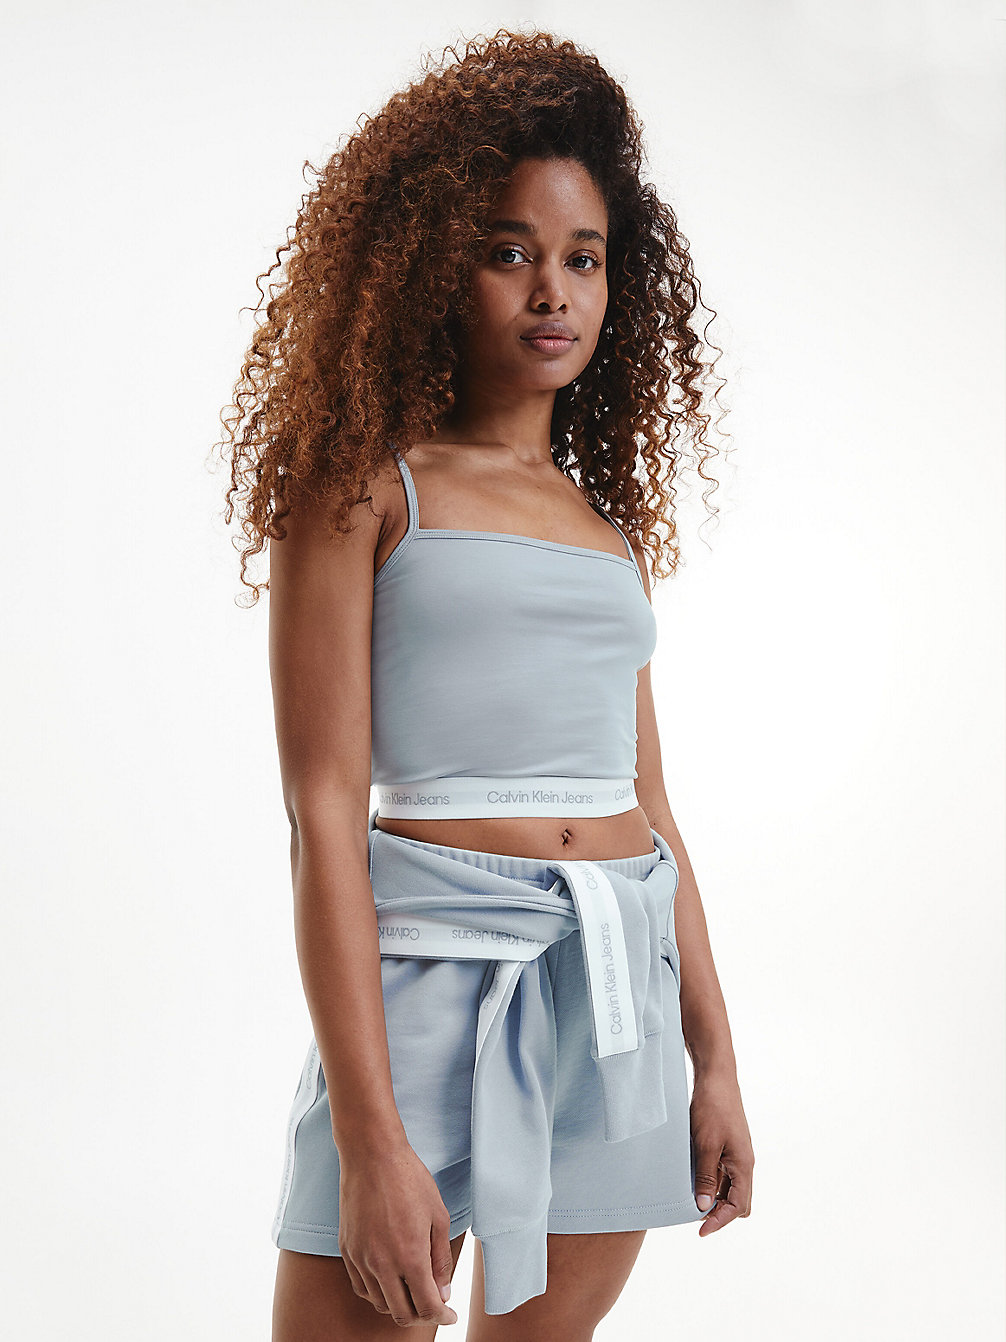 SILVER SKY Cropped Logo Tape Cami Top undefined women Calvin Klein